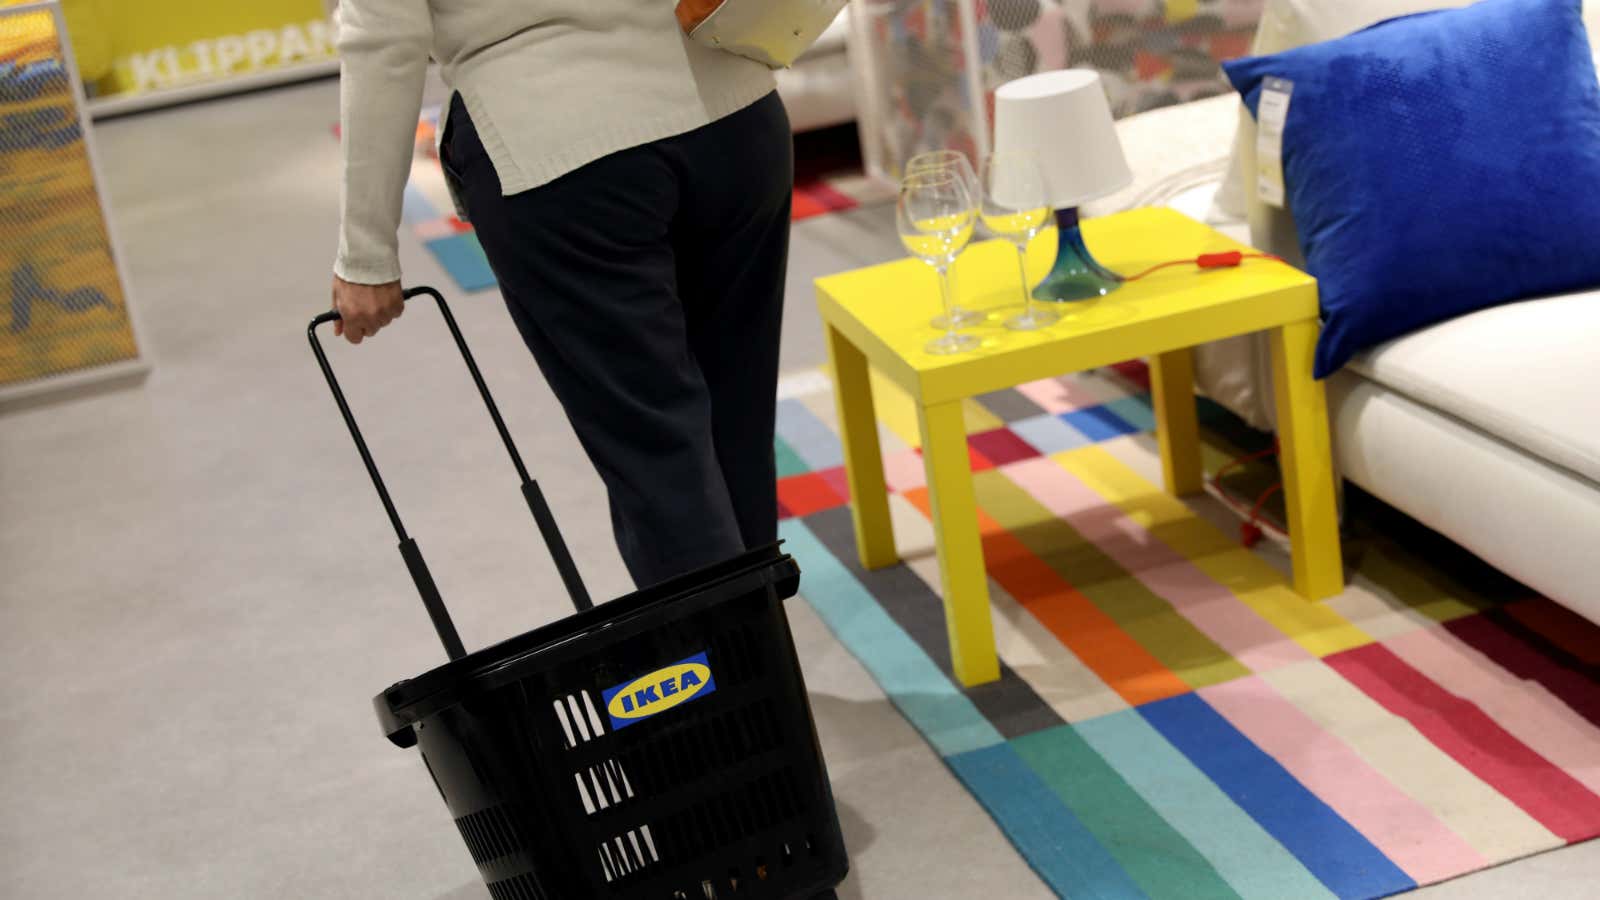 IKEA offers first look at furniture designed for millennials by